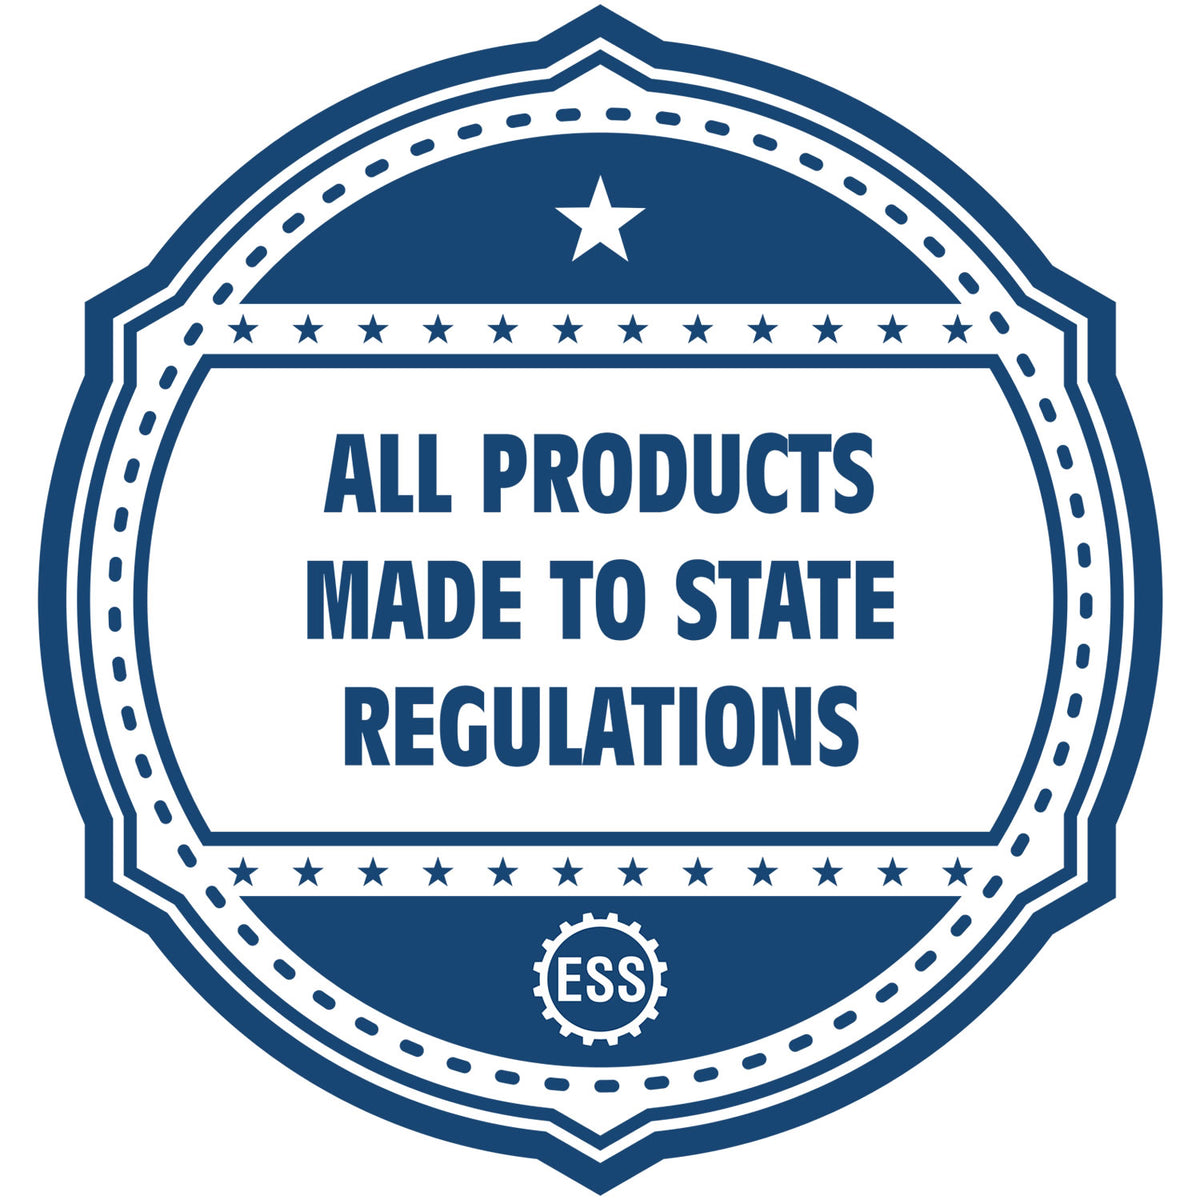 An icon or badge element for the Digital Colorado PE Stamp and Electronic Seal for Colorado Engineer showing that this product is made in compliance with state regulations.